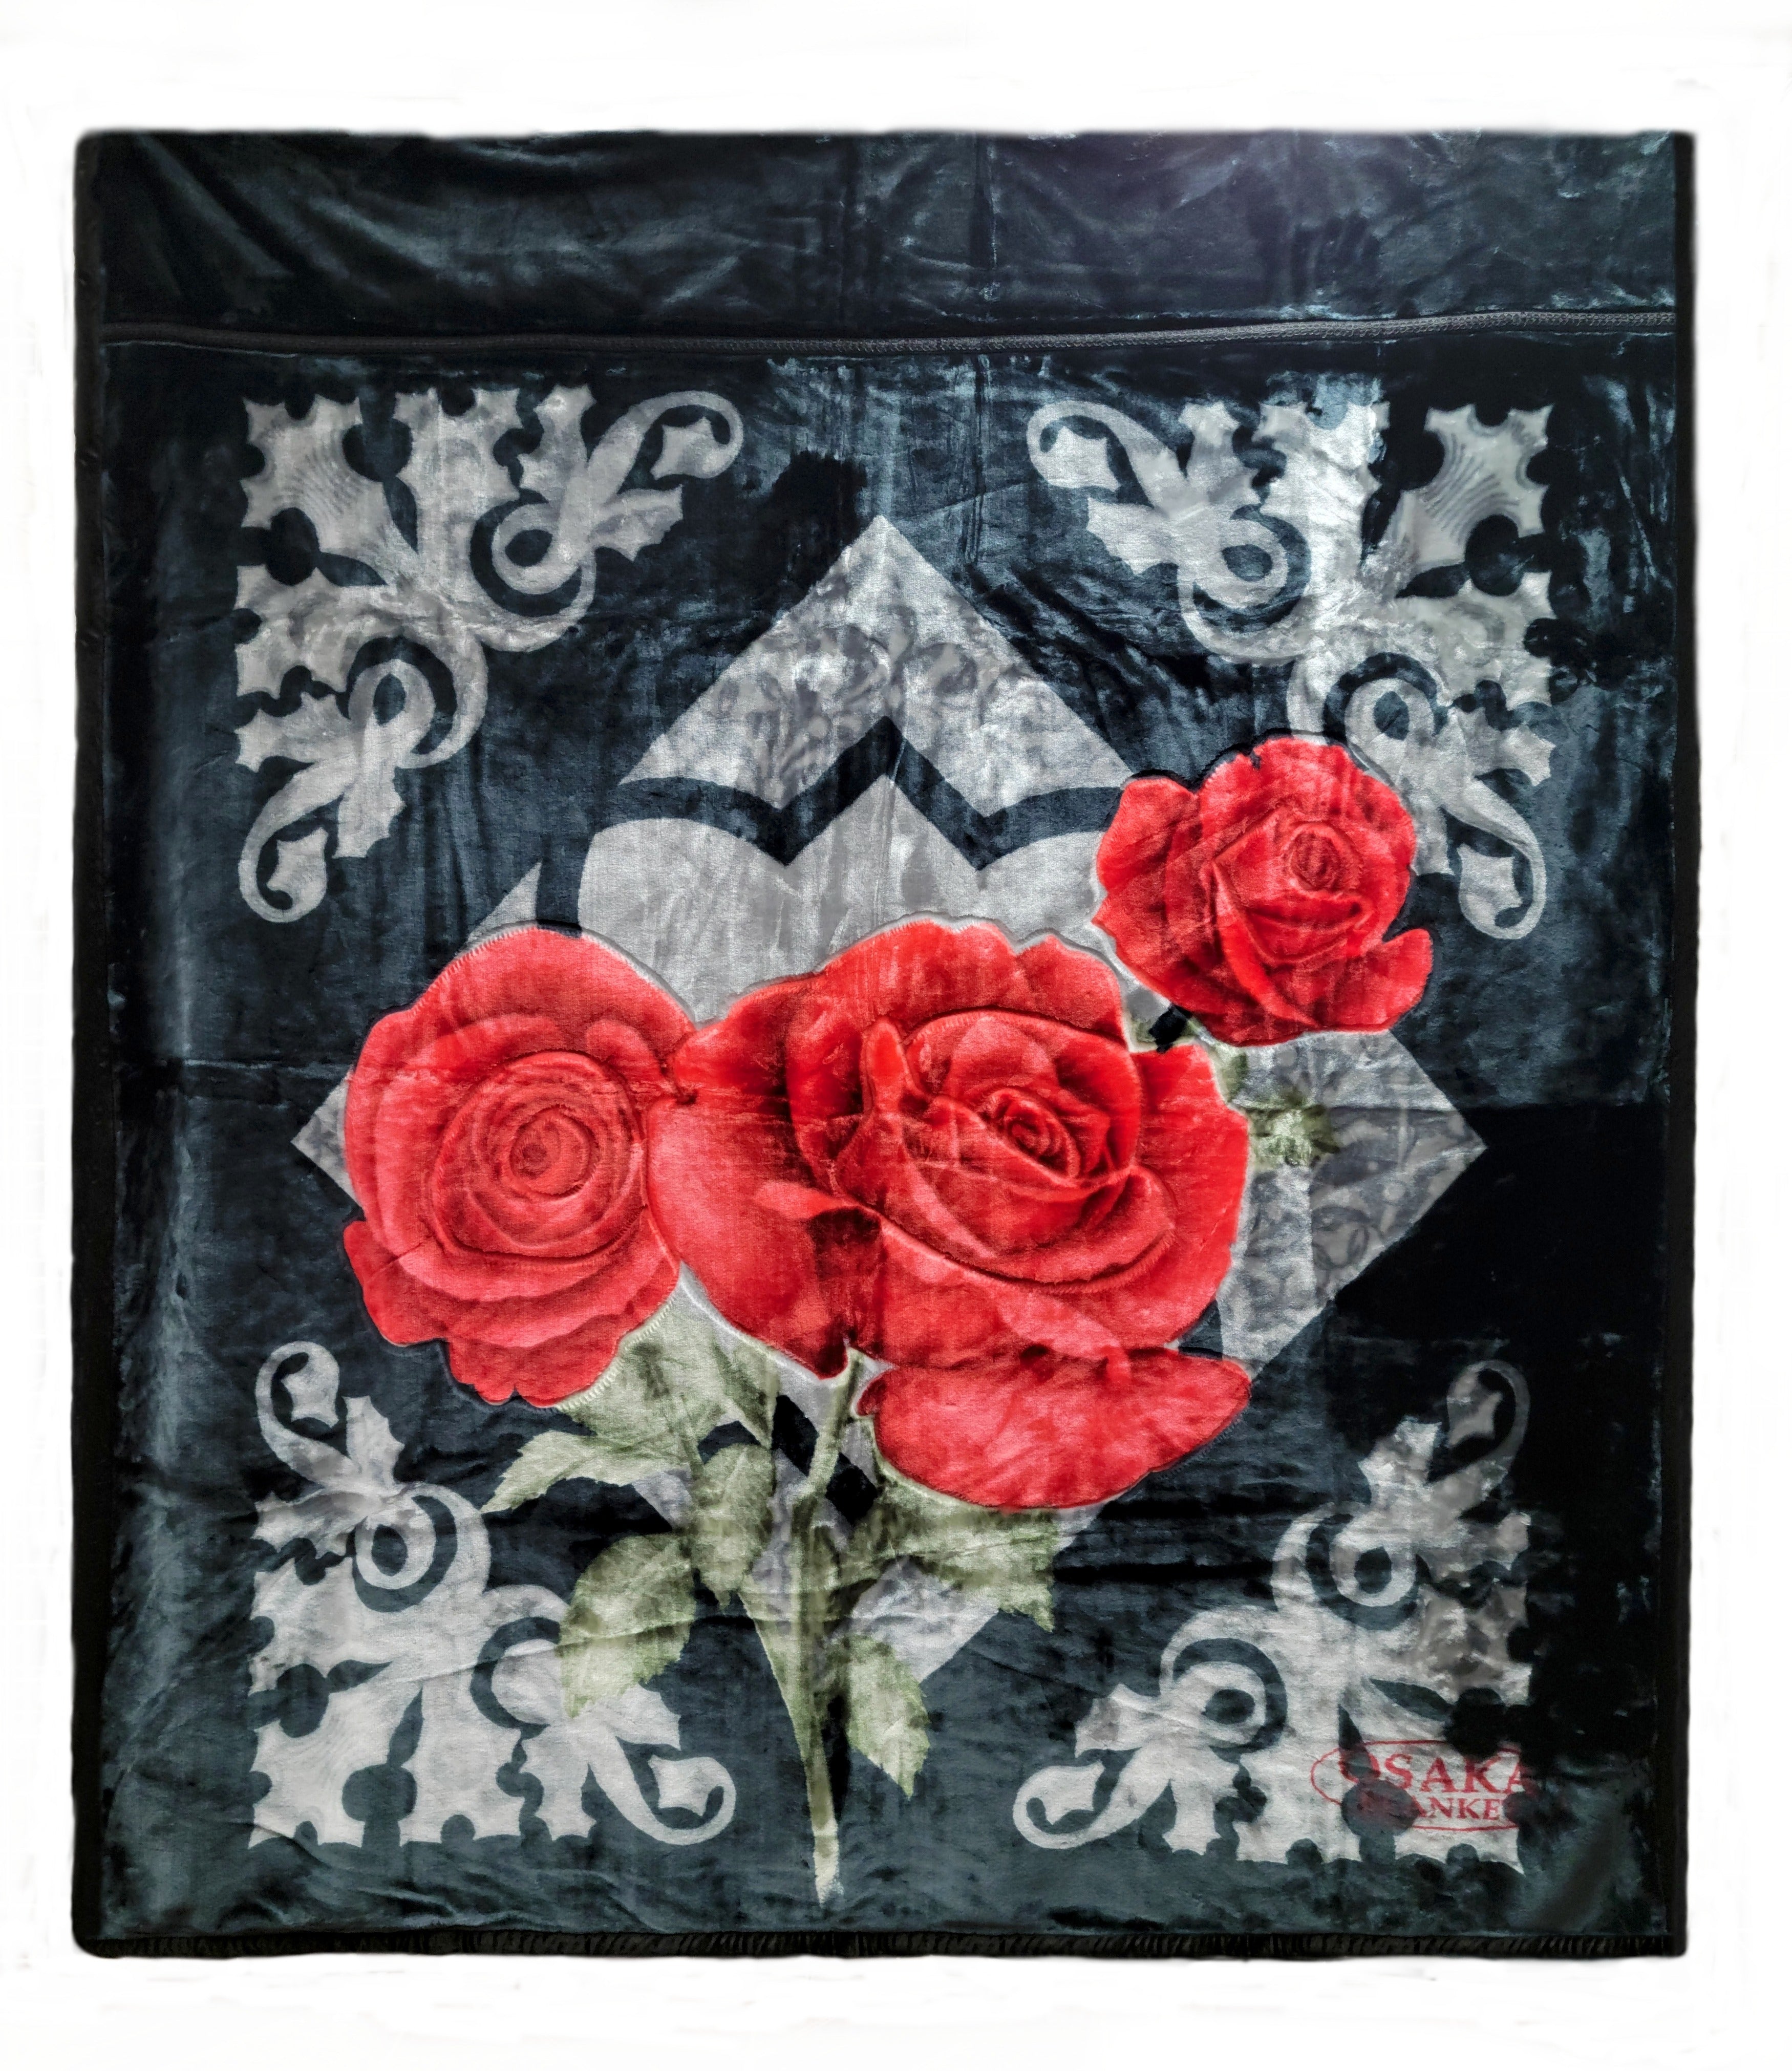 Osaka Red Rose Fleece Luxury Blanket Double Ply Blanket - Super Soft Warm - Thick and Heavy Plush Blanket